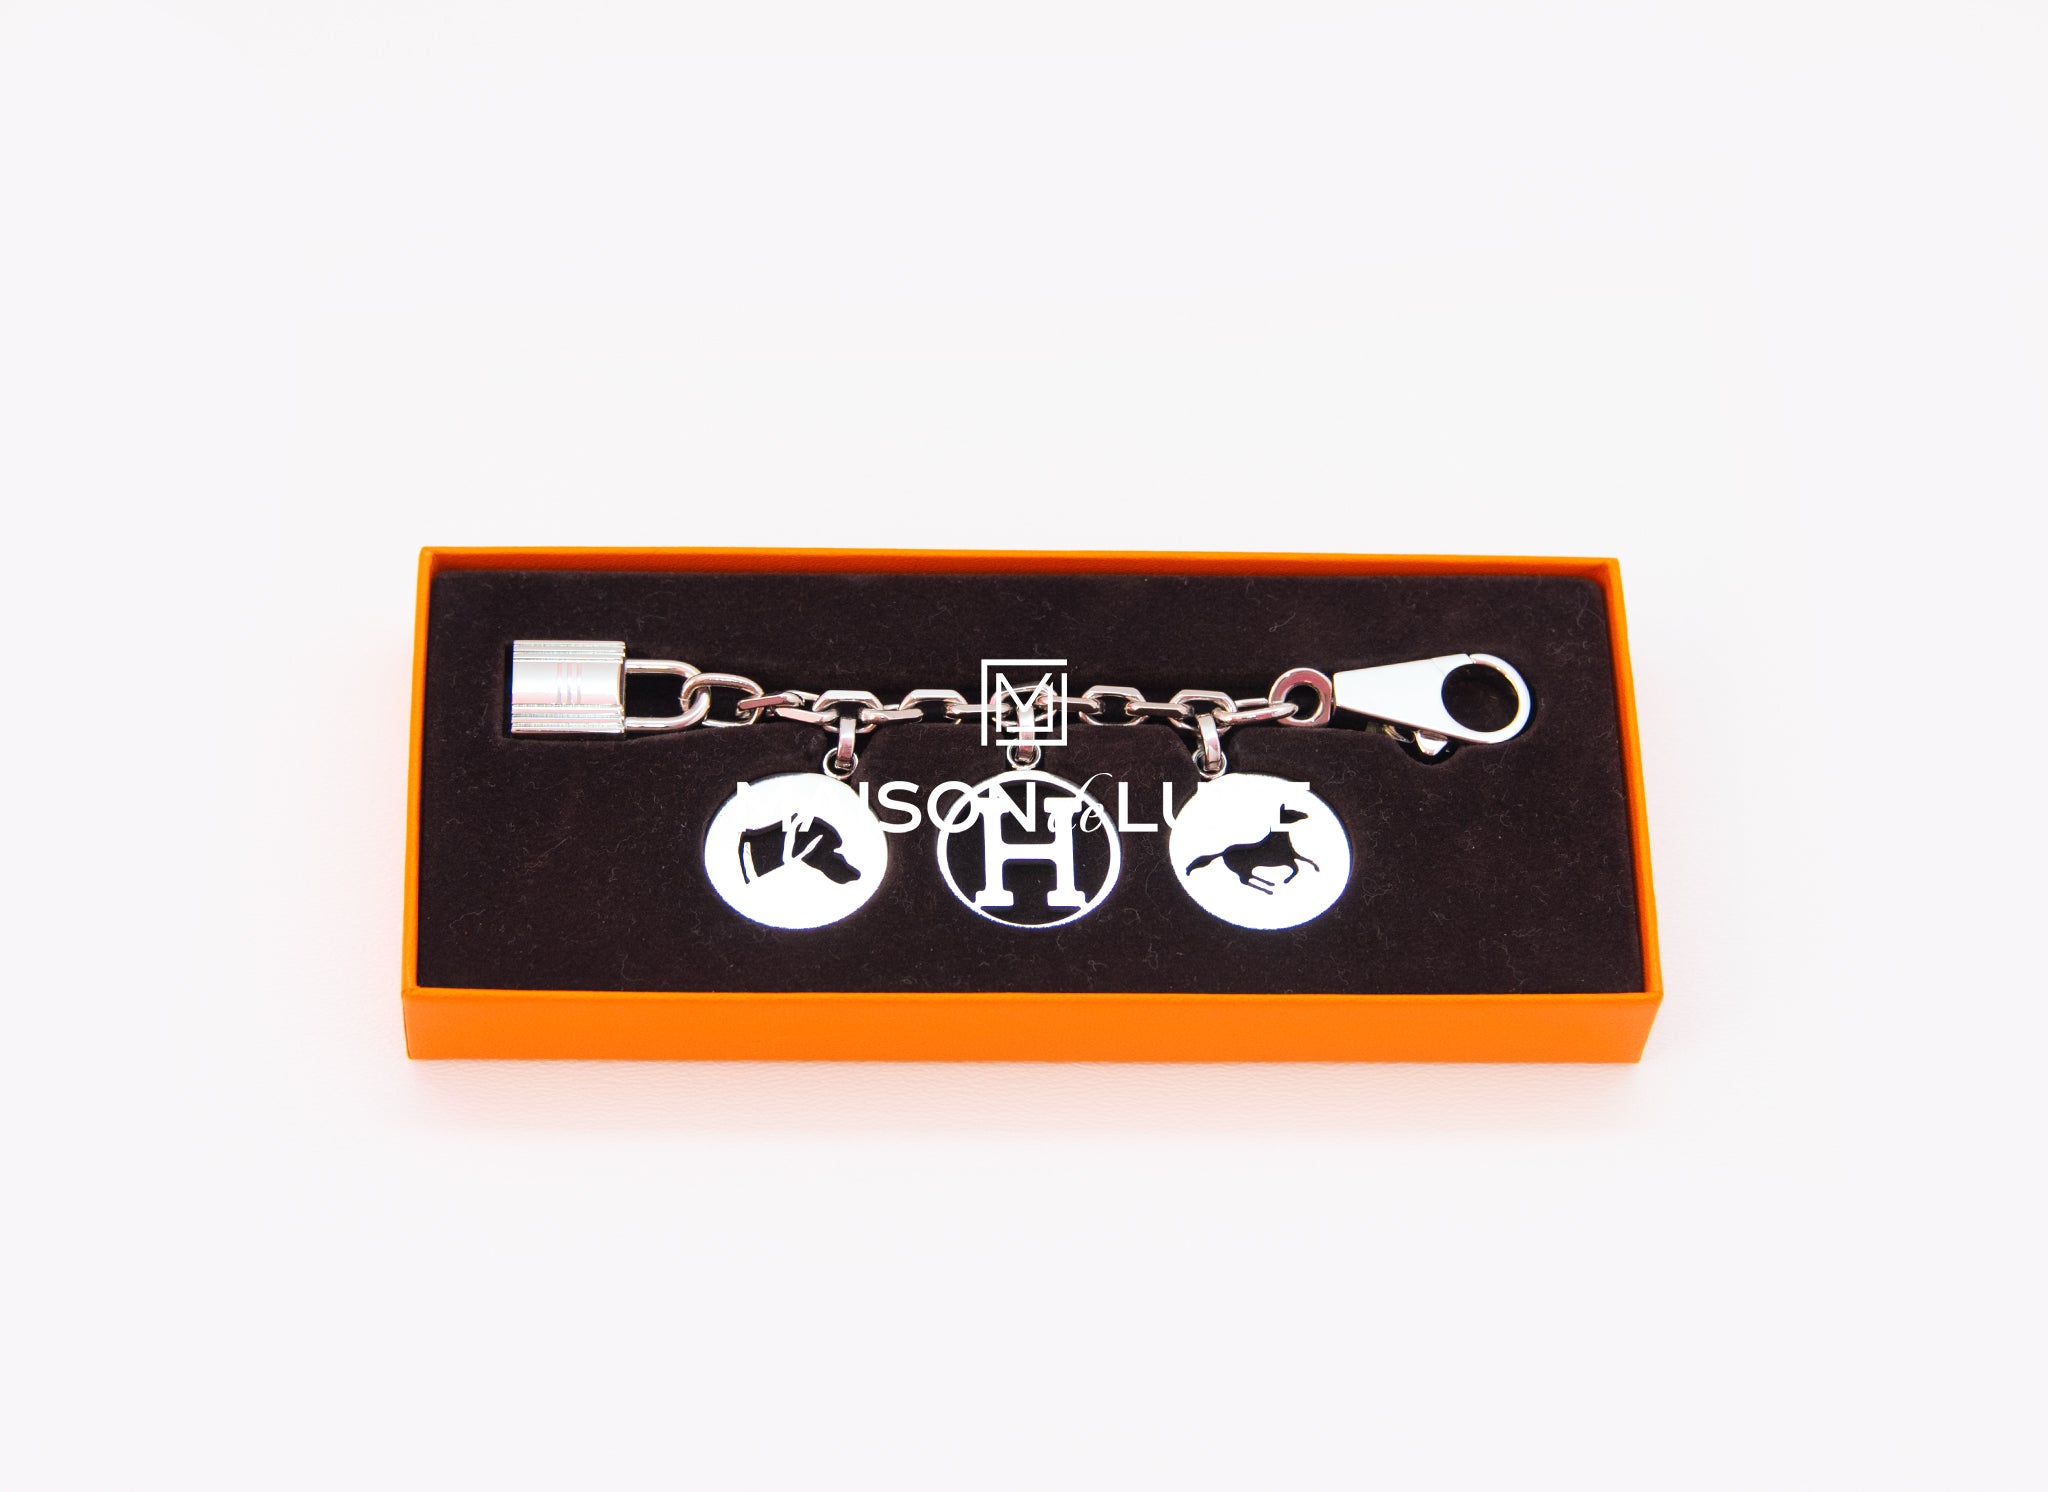 Hermès Breloque Olga Palladium Bag Charm Available For Immediate Sale At  Sotheby's